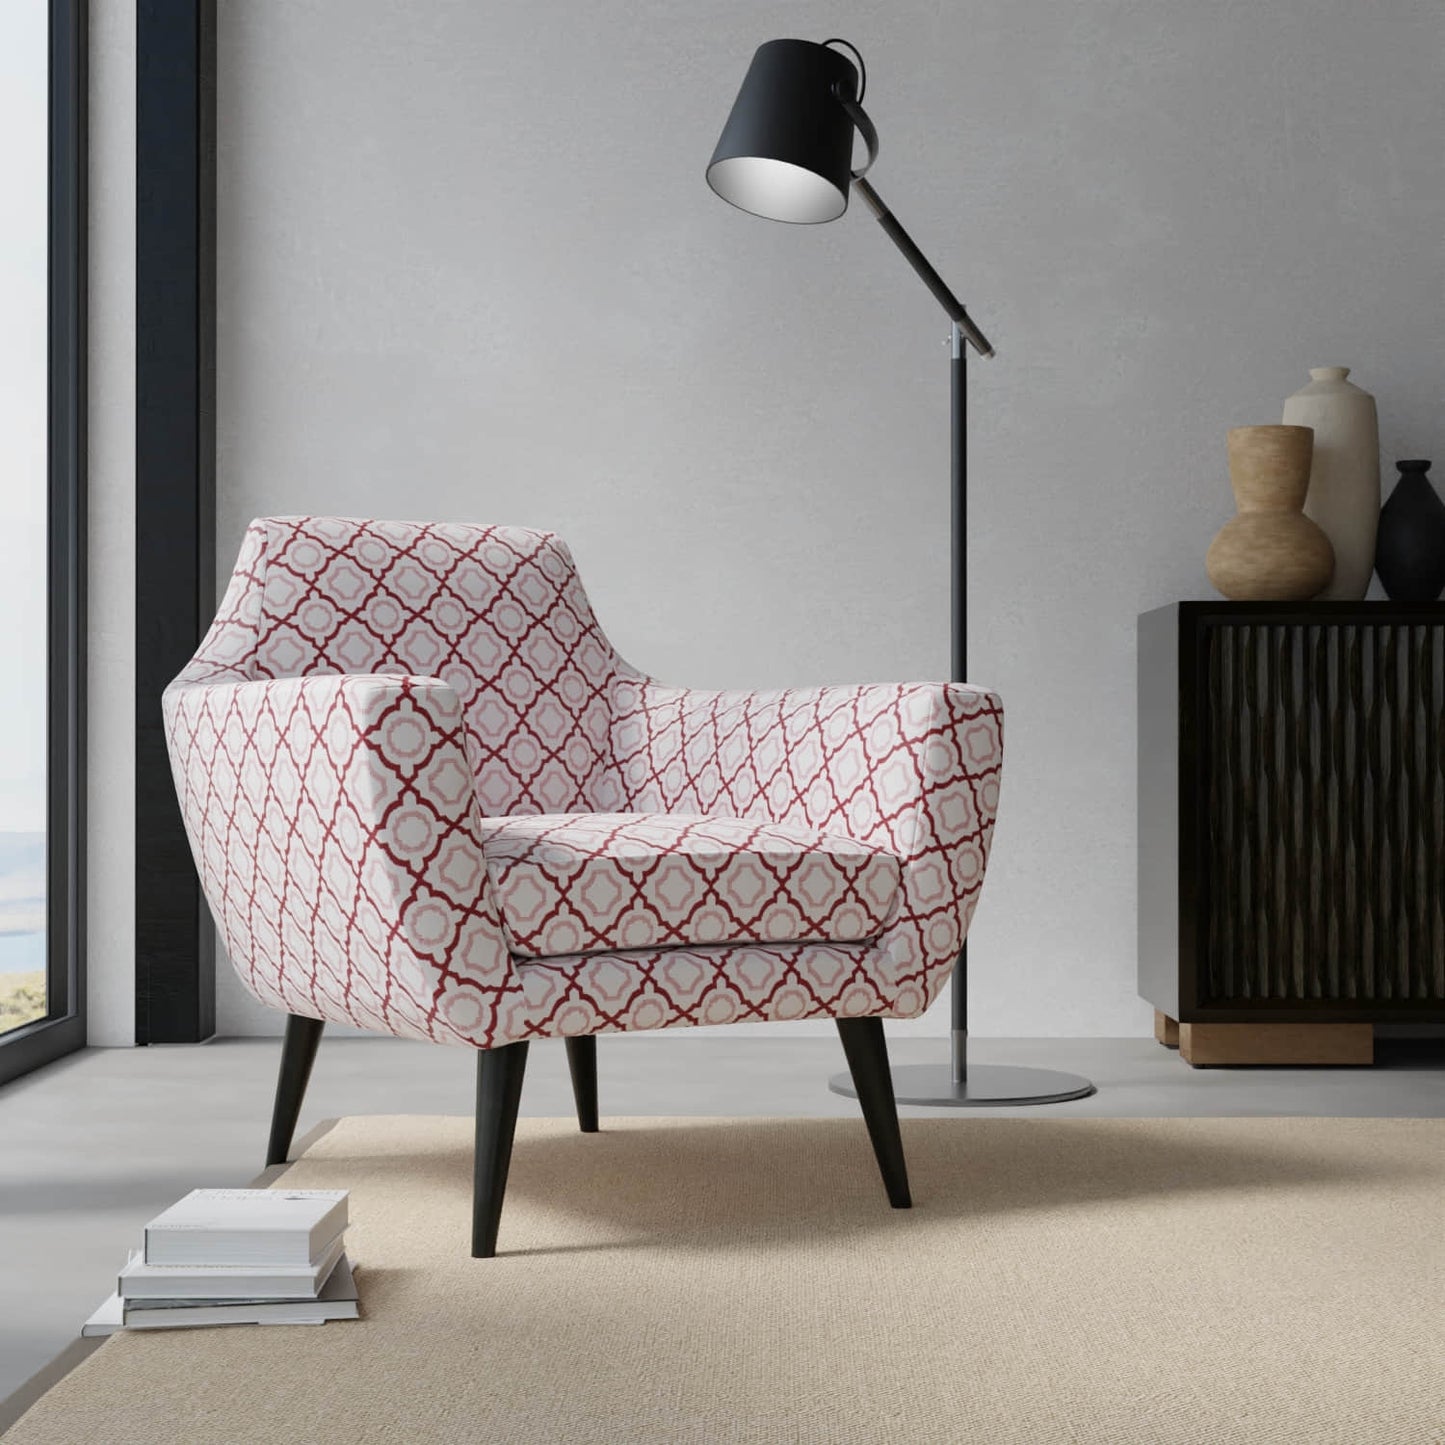 Morgan Scarlet upholstered on a contemporary chair